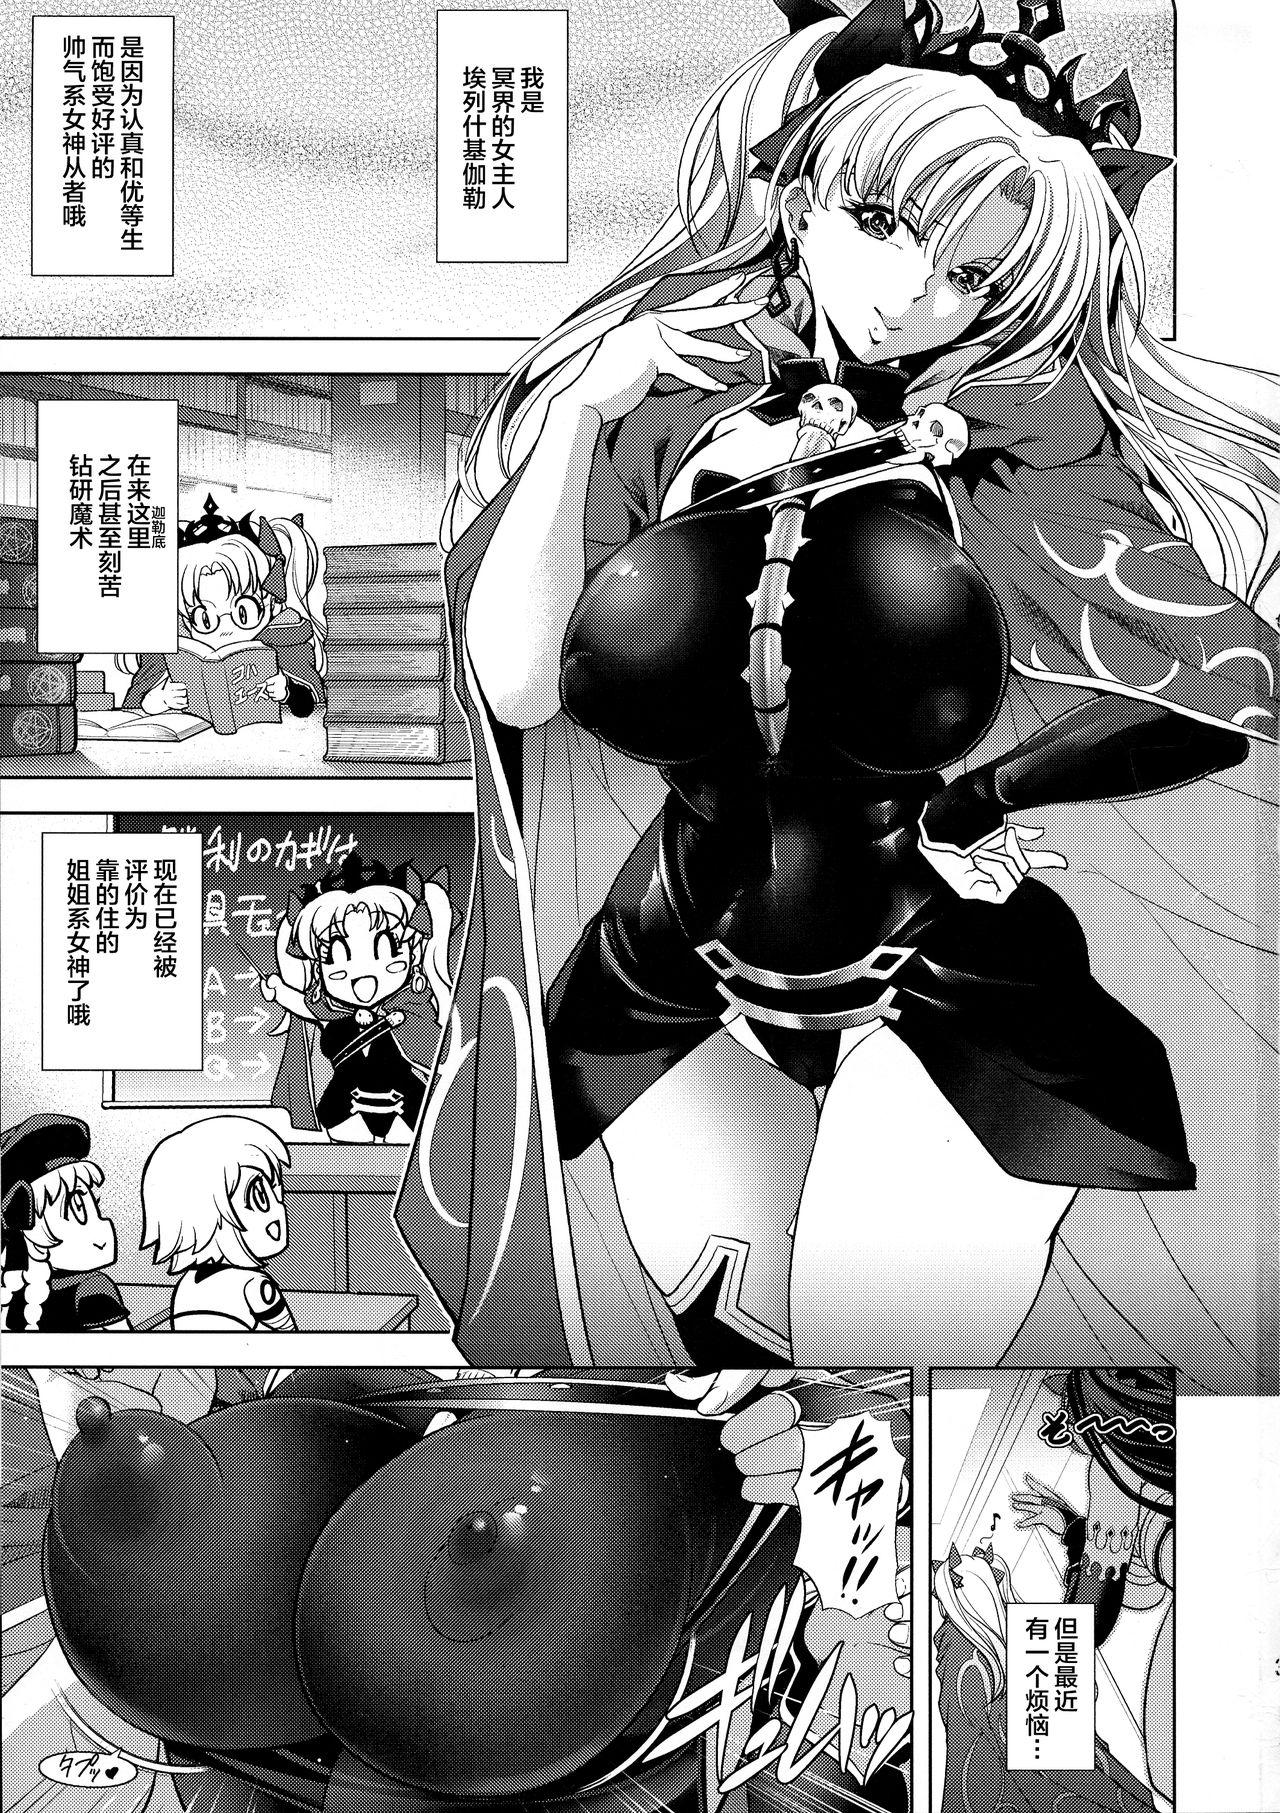 Thick COMMAND CODE - Fate grand order Anal Play - Page 2